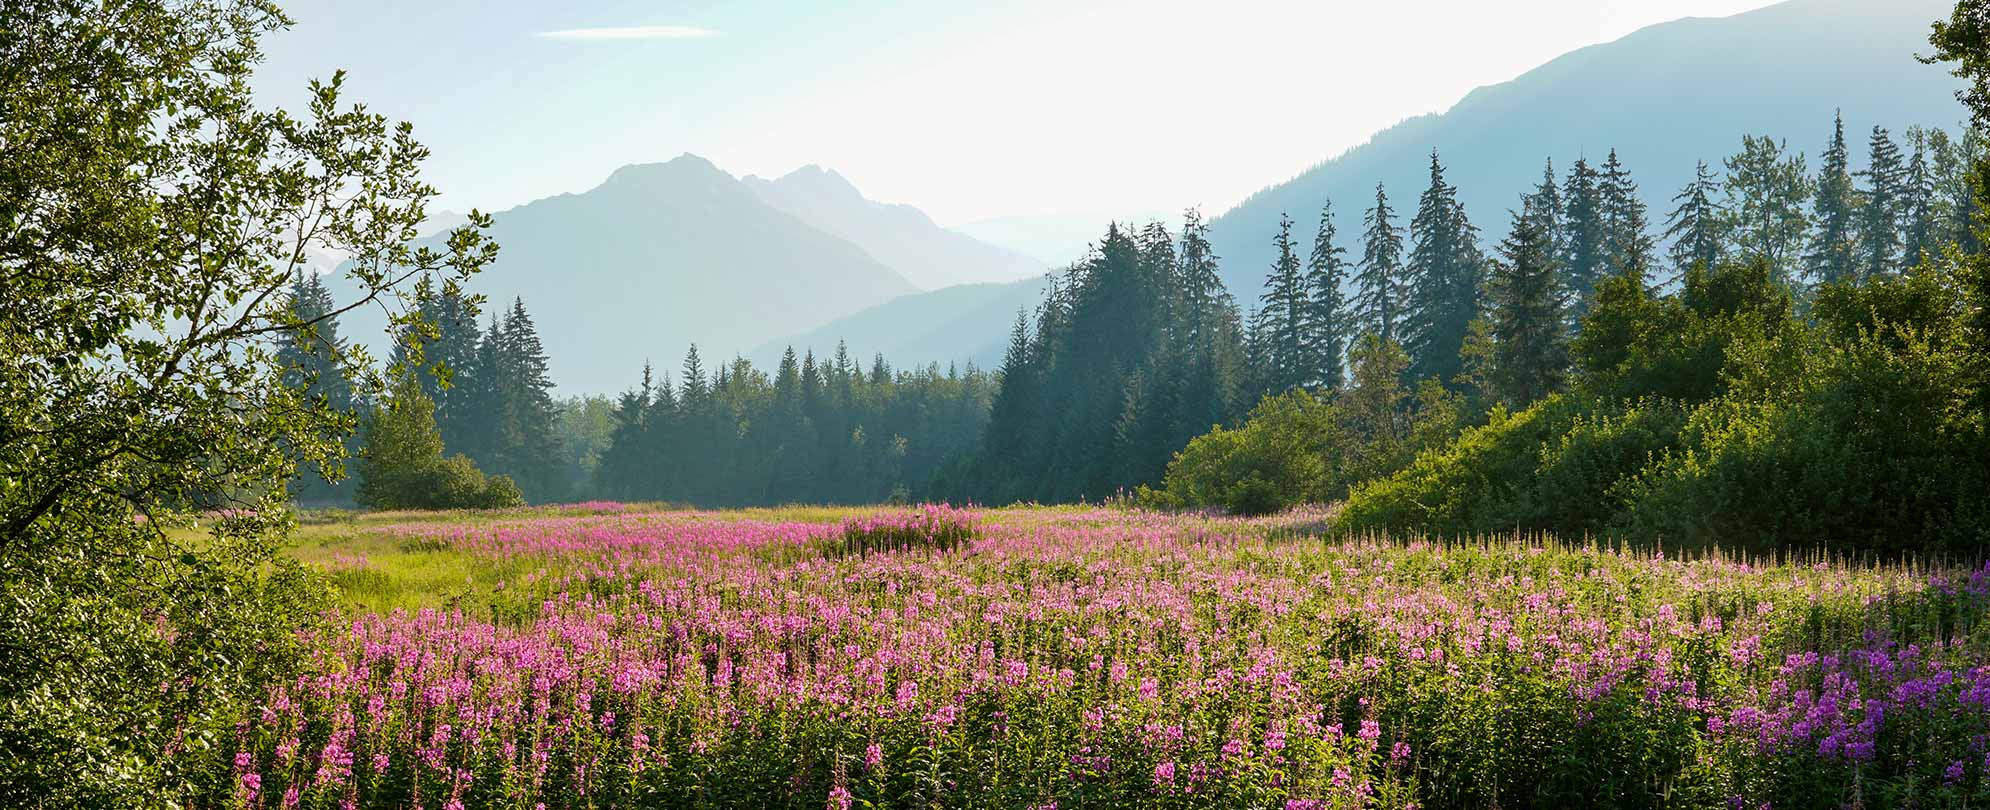 A large meadow filled with flowers and greenery surrounded by mountains and glistening sun.